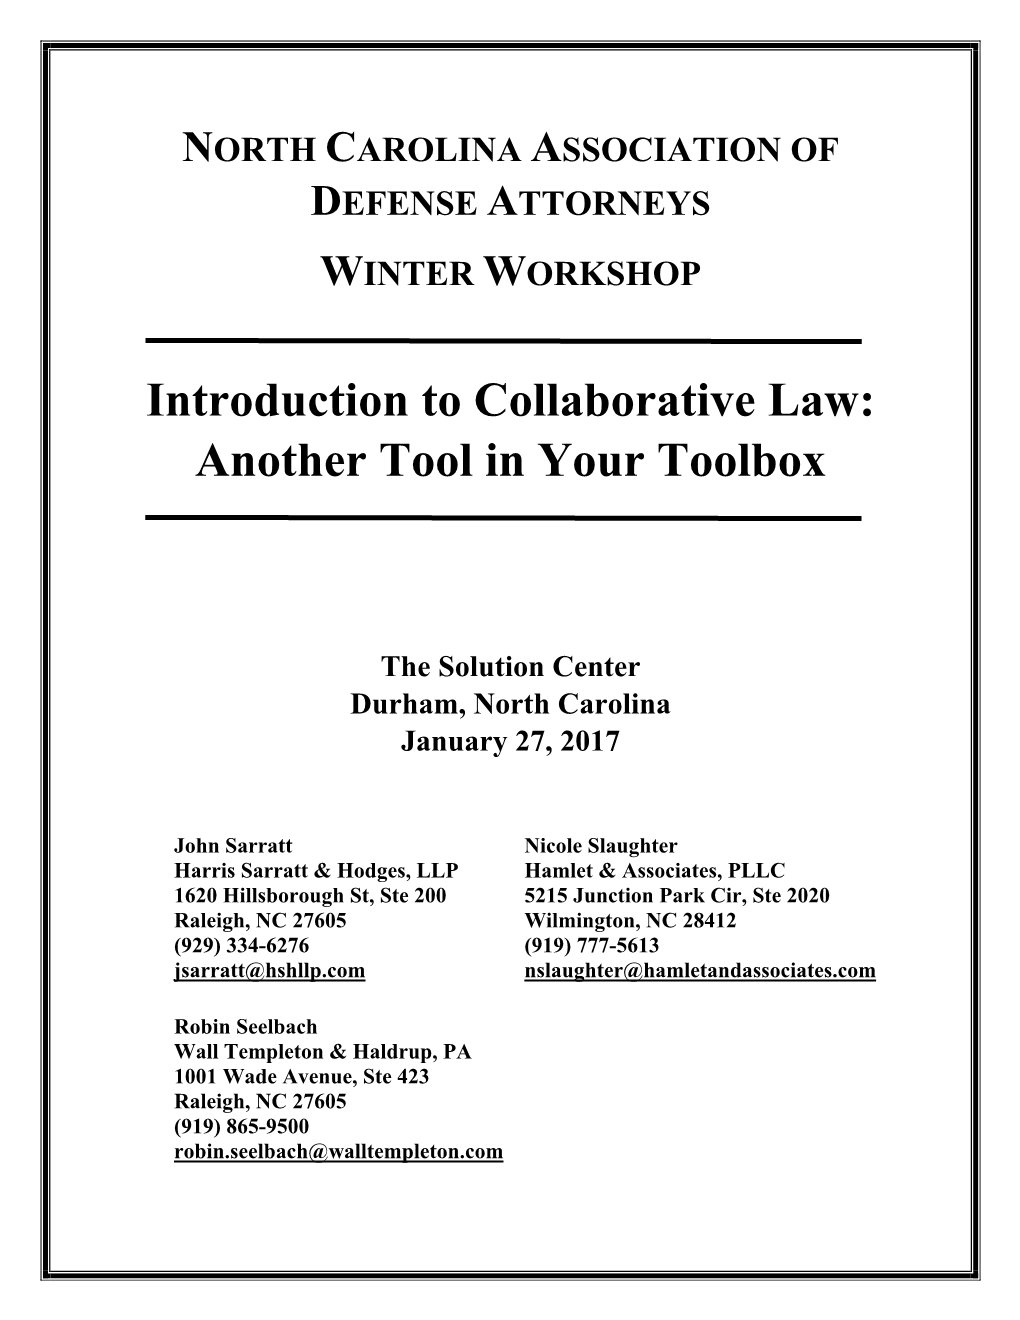 Introduction to Collaborative Law: Another Tool in Your Toolbox